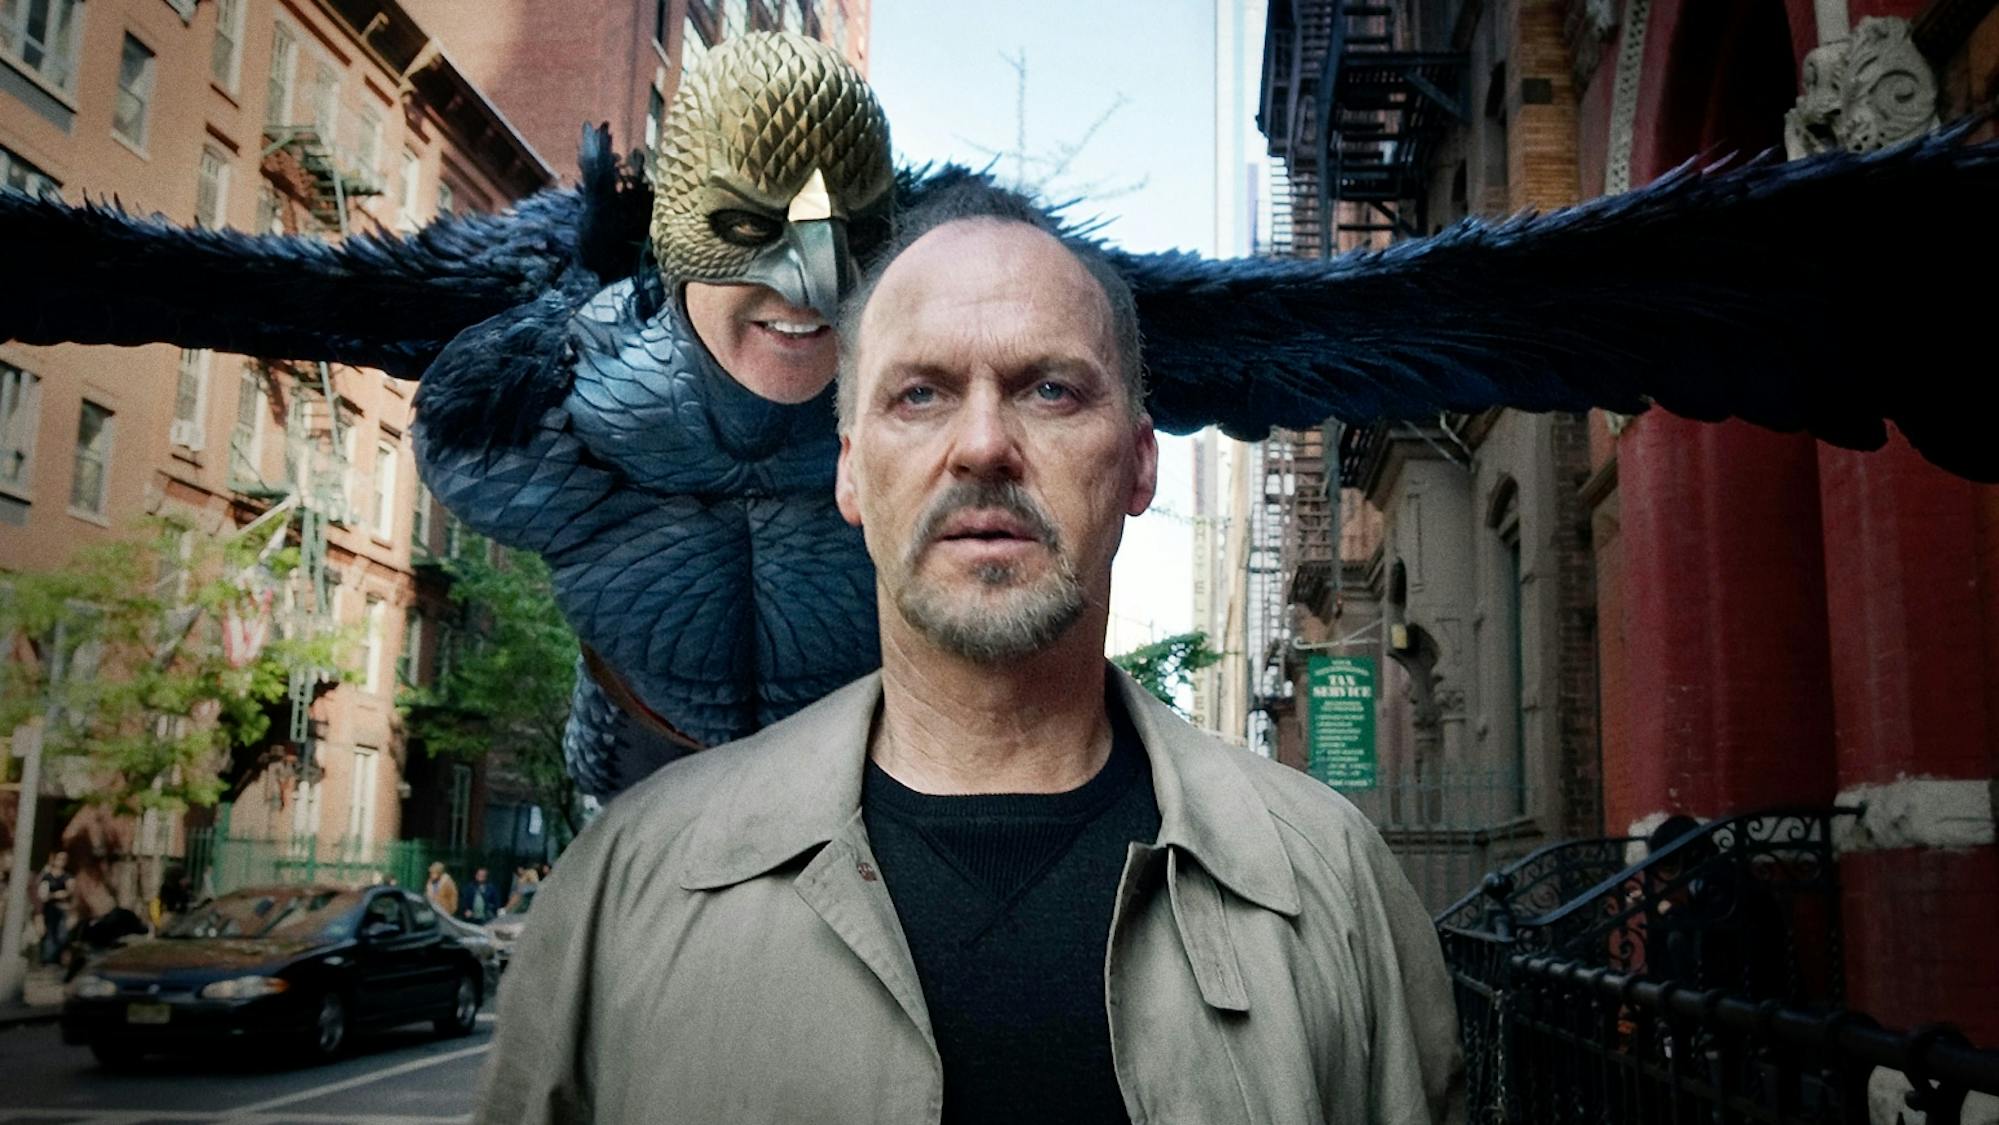 Riggan Thomson (Michael Keaton) in Birdman wears an olive colored jacket and black t-shirt. Behind him is the black costumed birdman. They make their way down a New York City street.